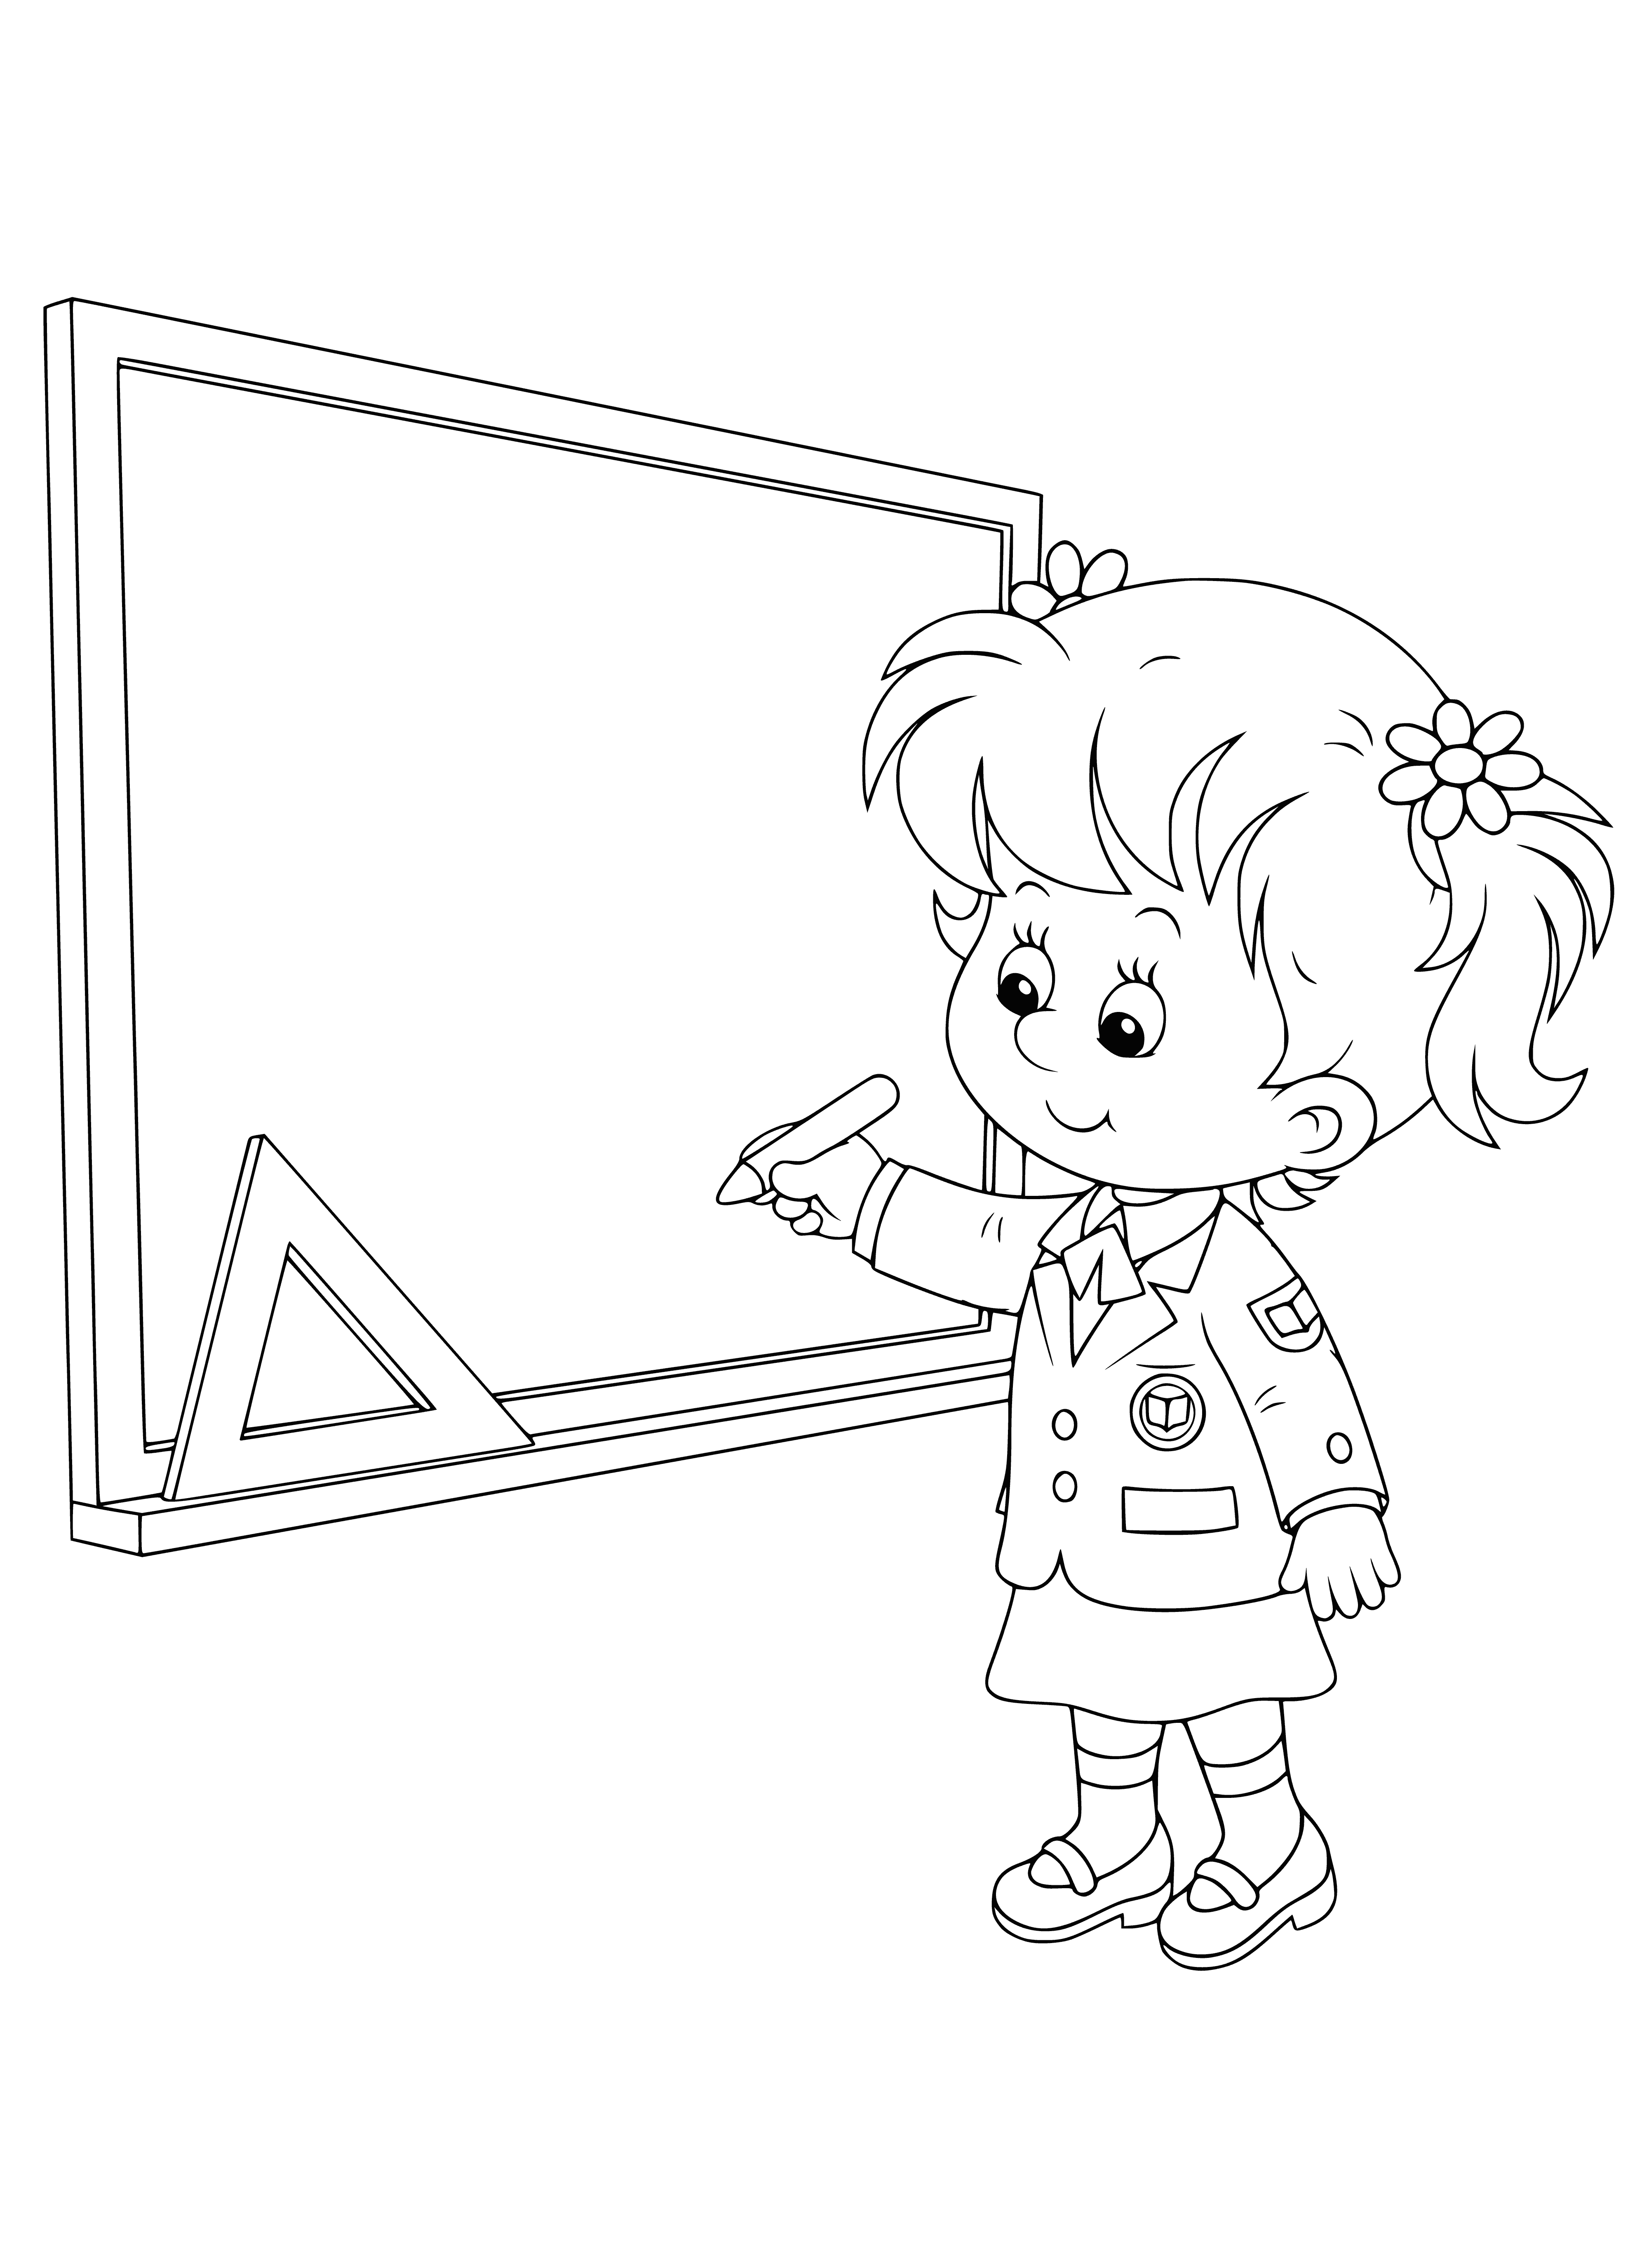 coloring page: Girl stands at blackboard, writes something with chalk in hand. #Education